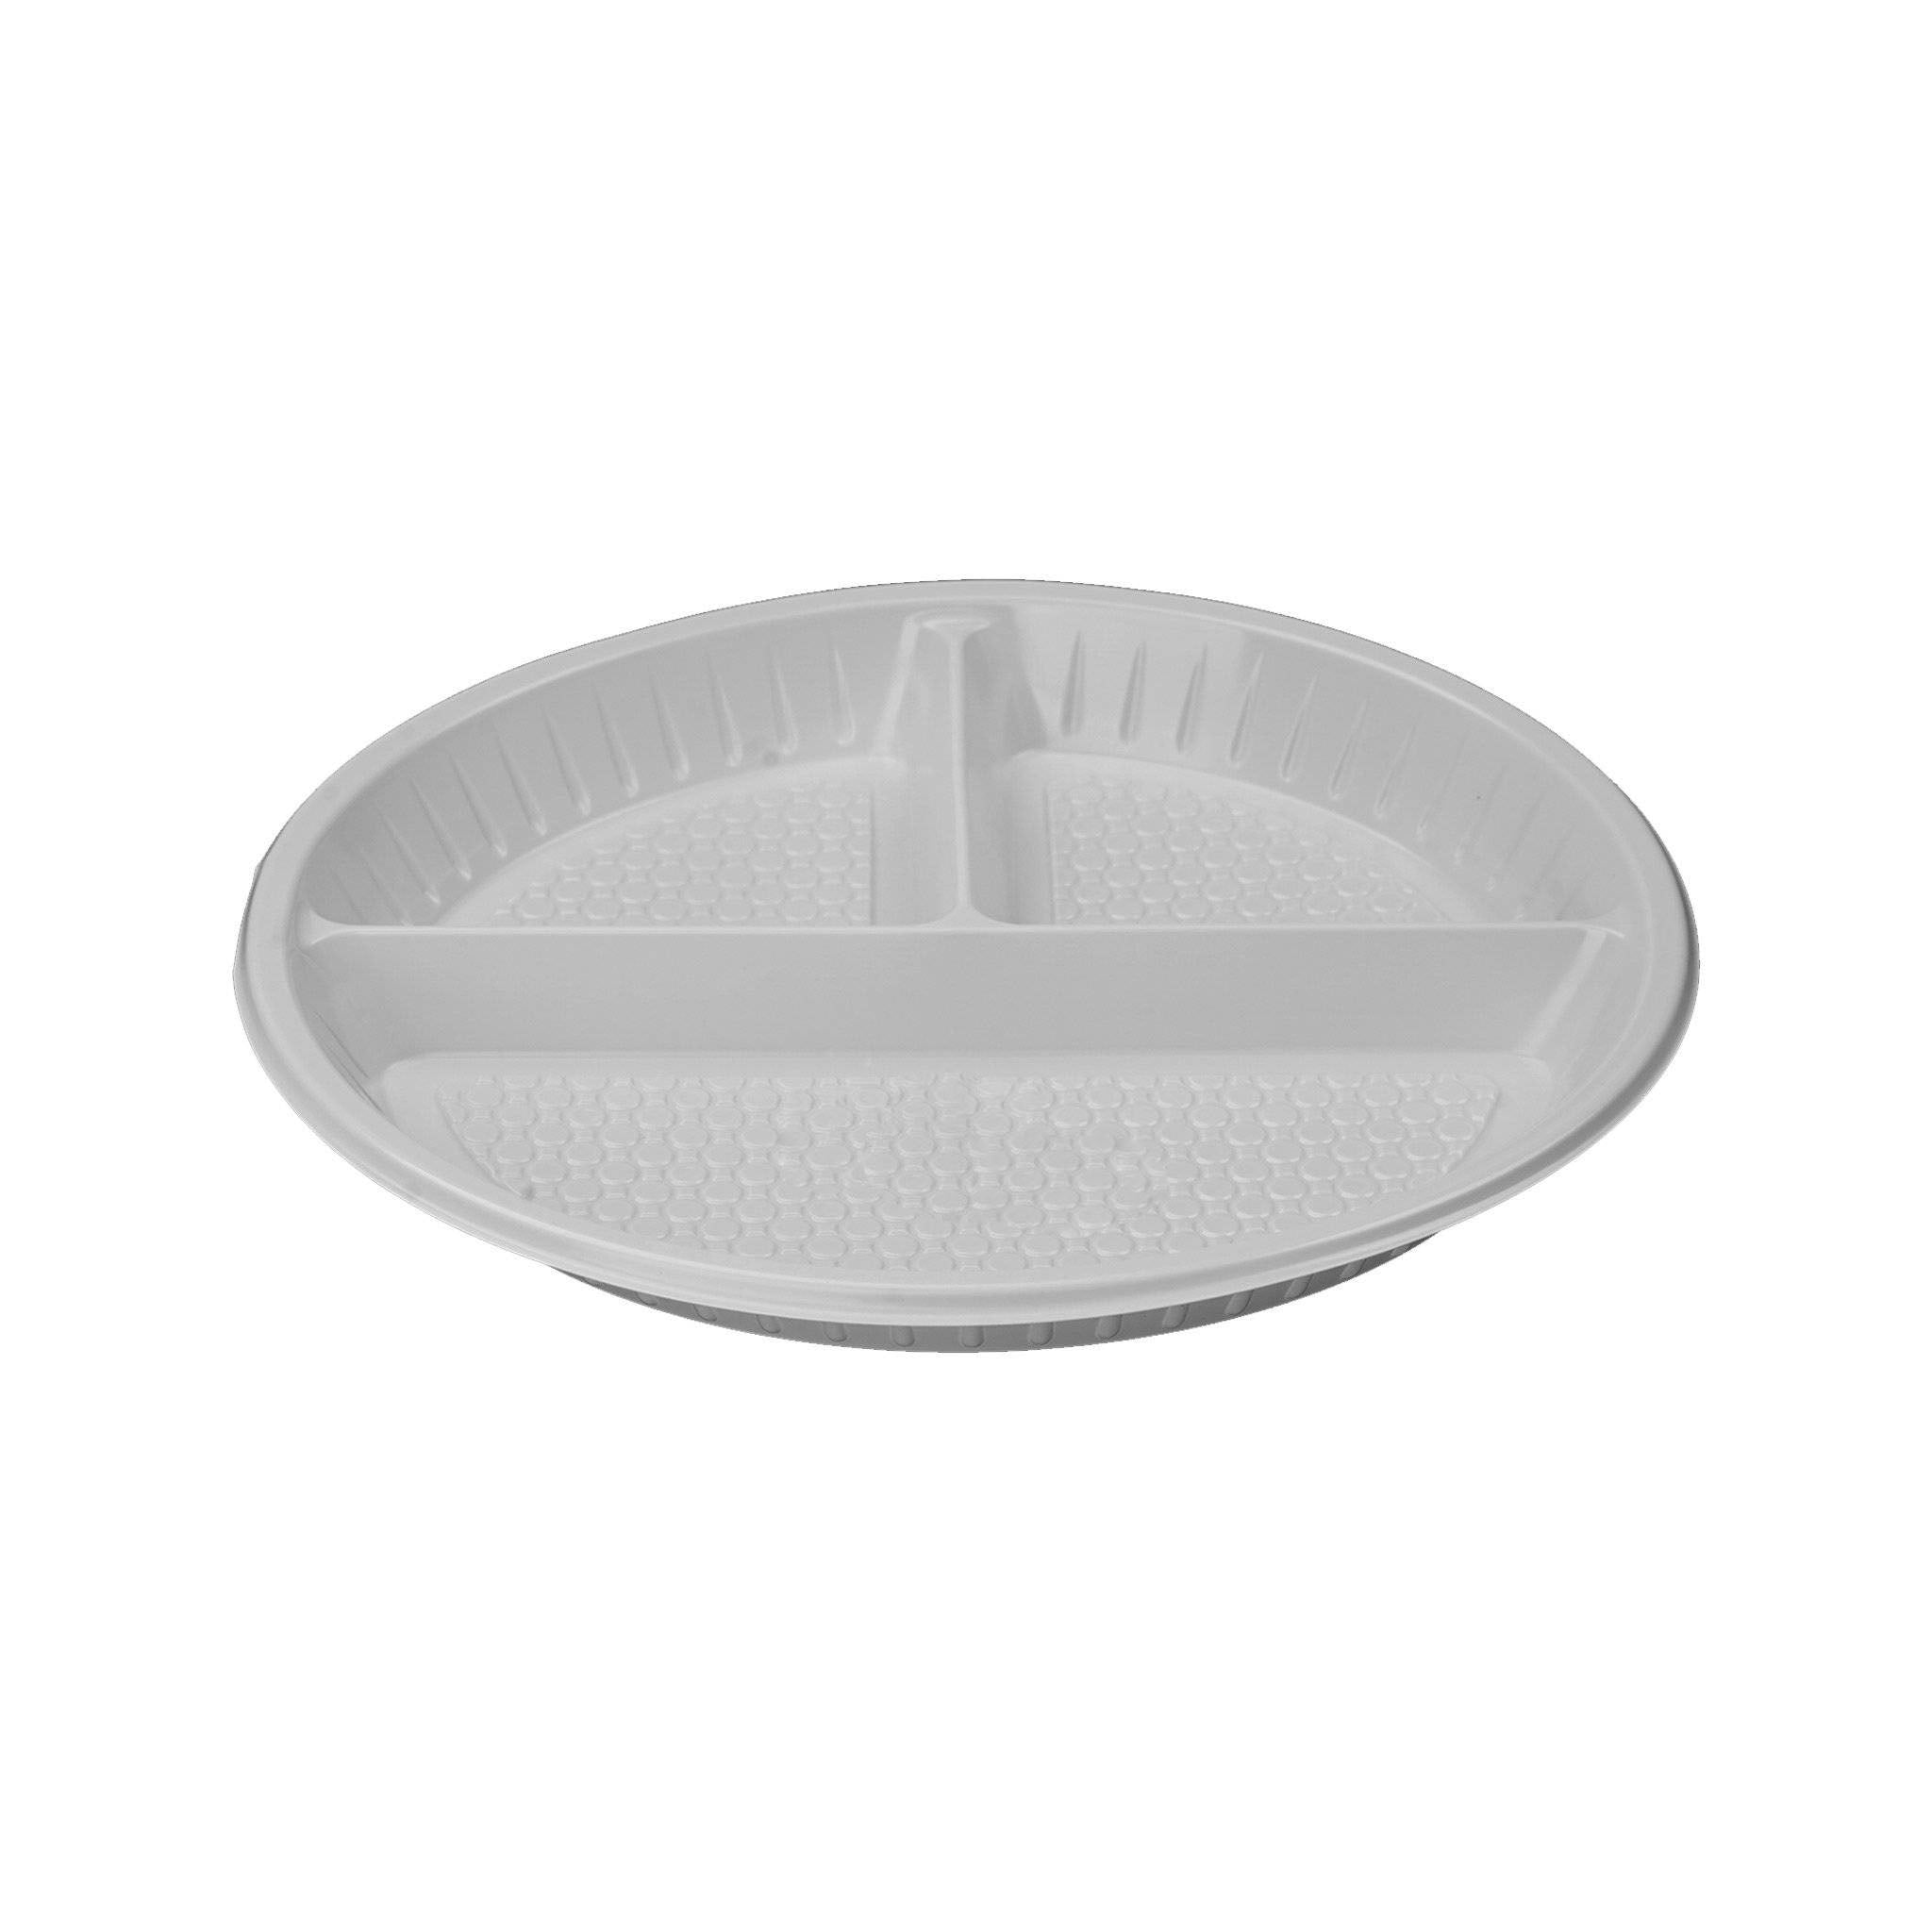 500 Pieces Round Plastic Plate 3-Compartment 10 Inch